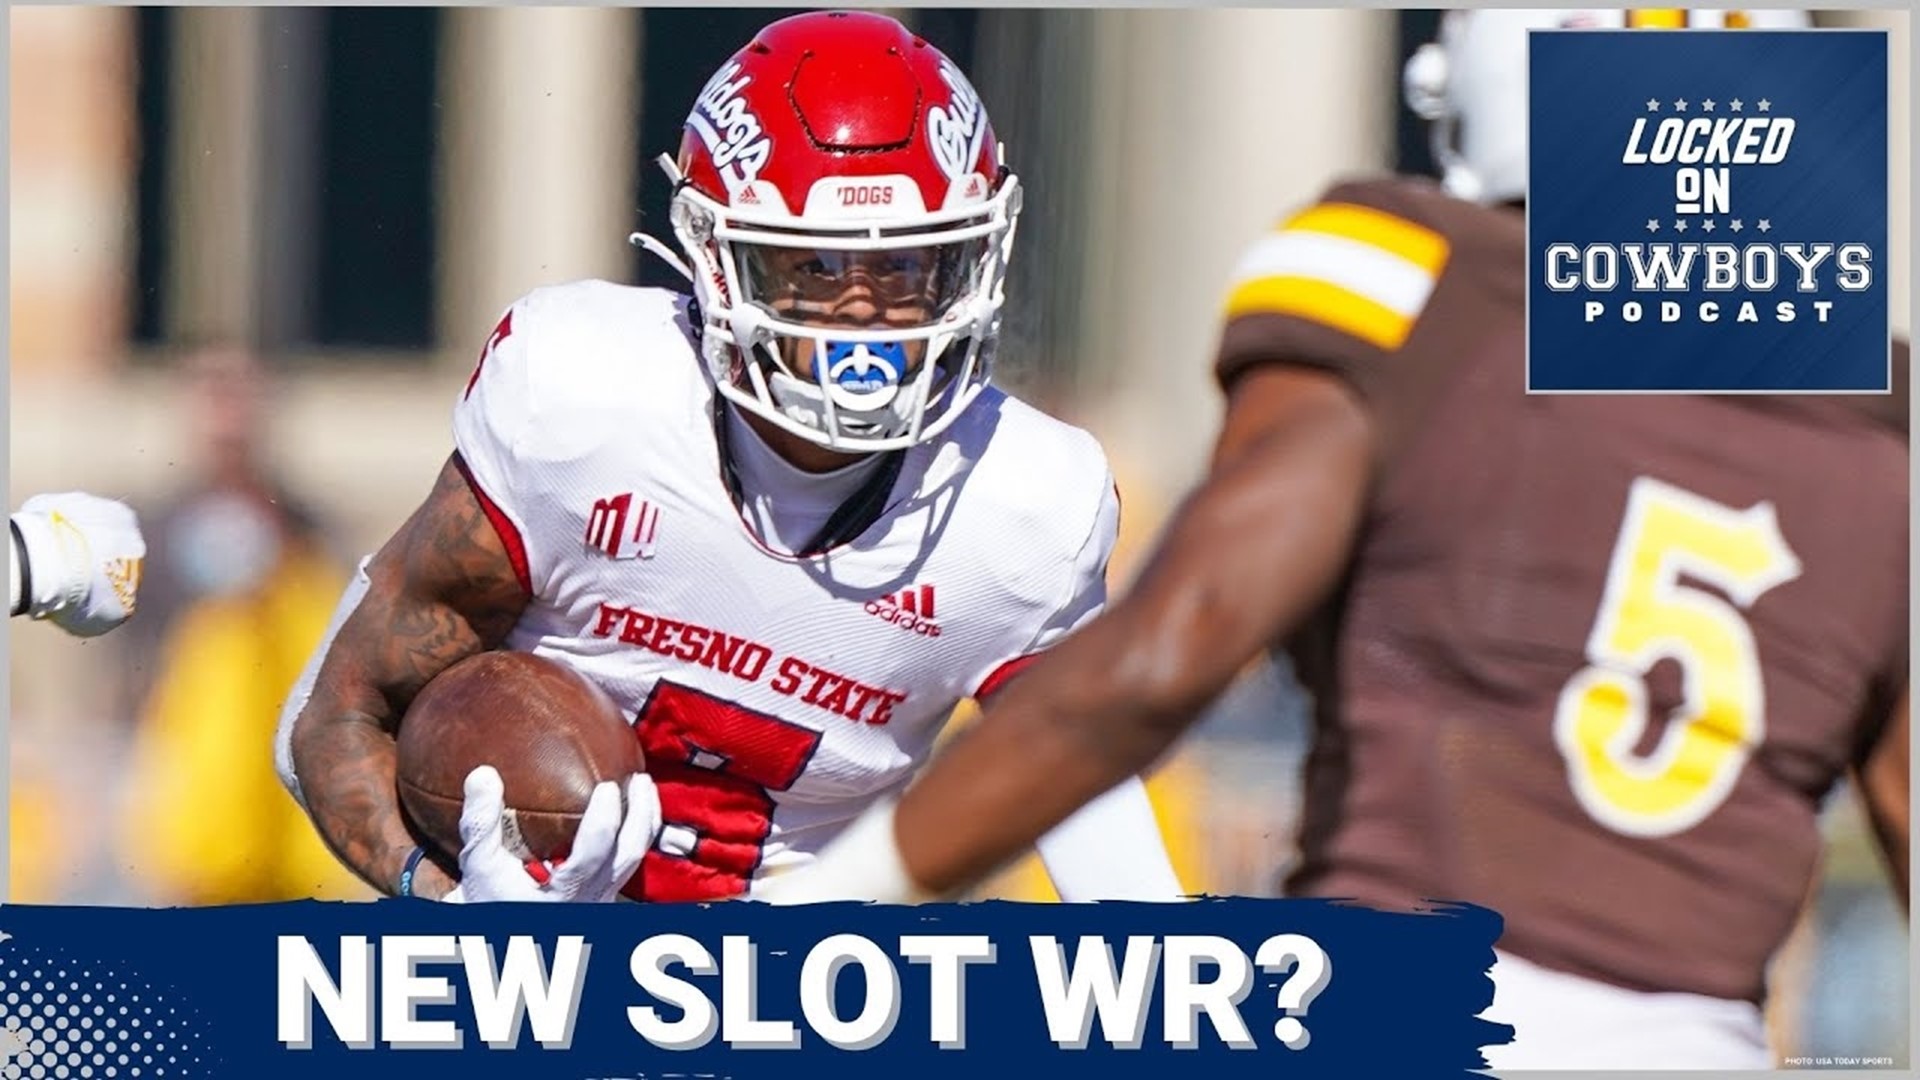 Marcus Mosher and Landon McCool take a look at two UDFA wide receivers that the Dallas Cowboys signed this off-season.